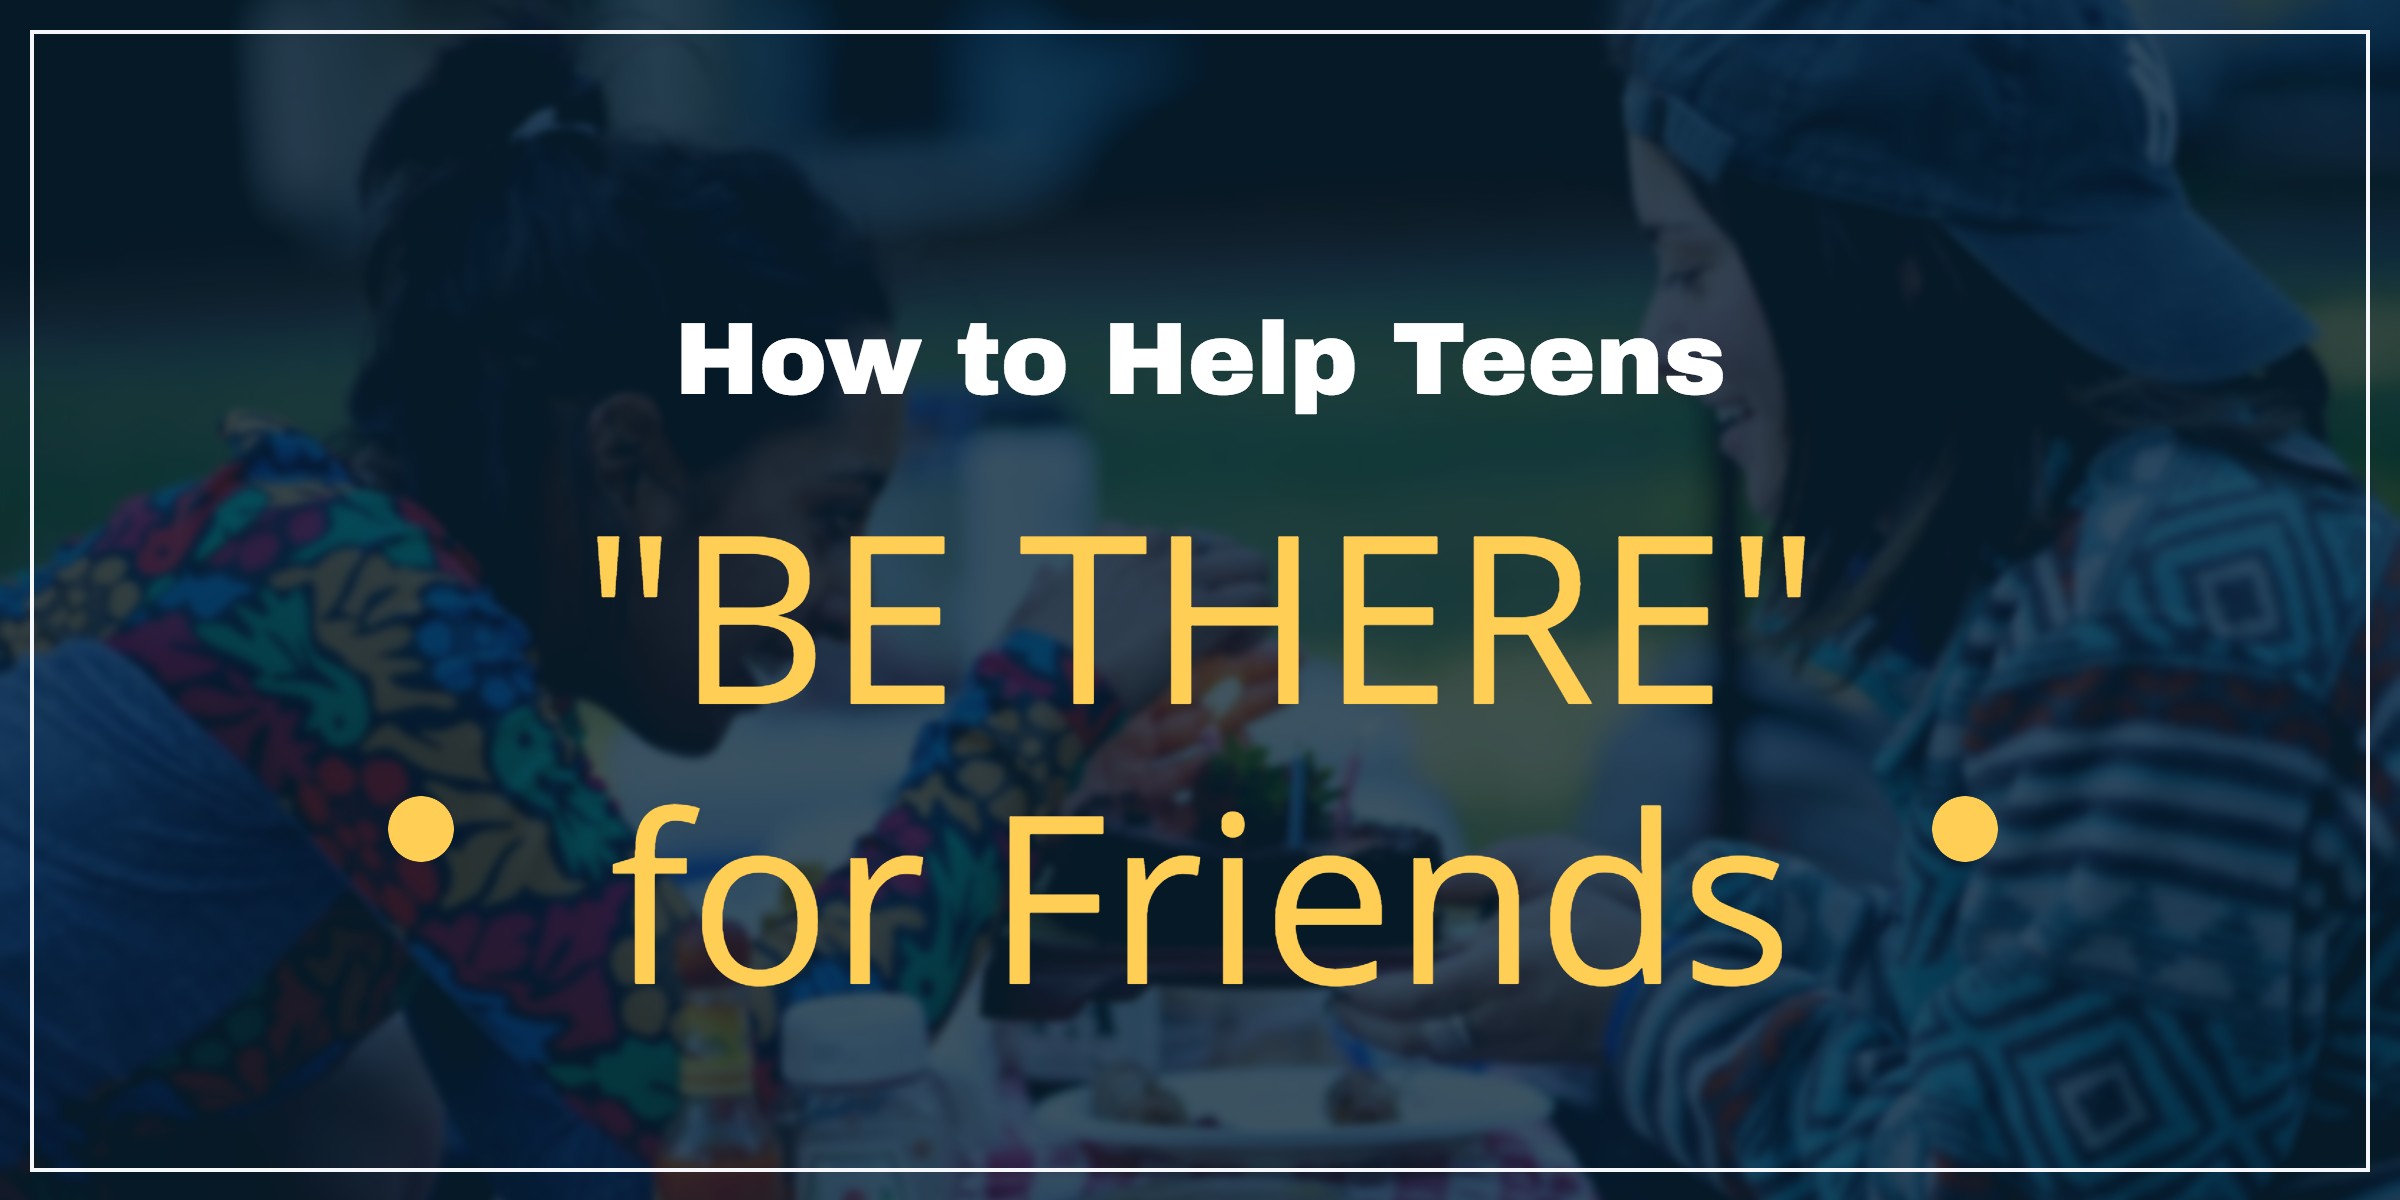 Helping Teens “Be There” for their Friends